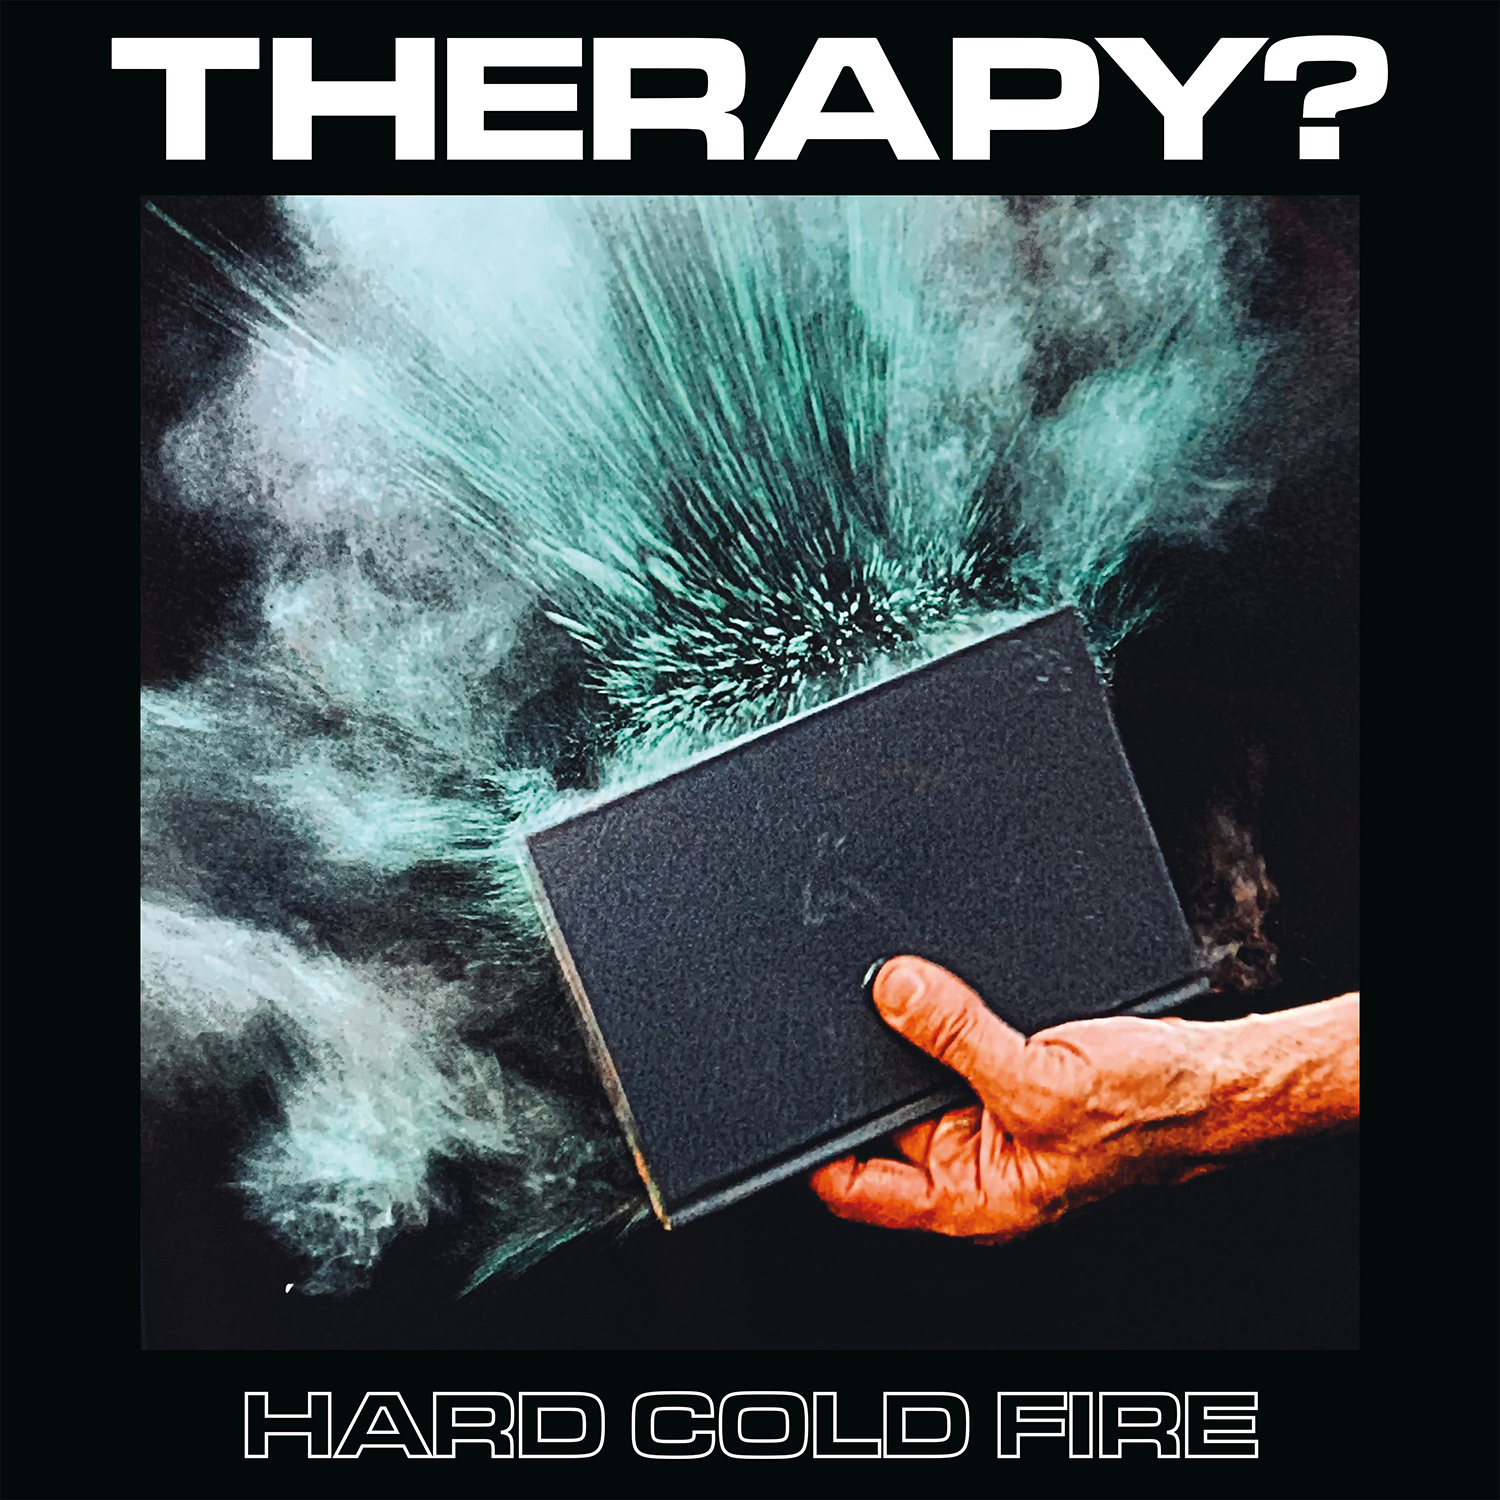 Artwork for ‘Hard Cold Fire’ by Therapy?